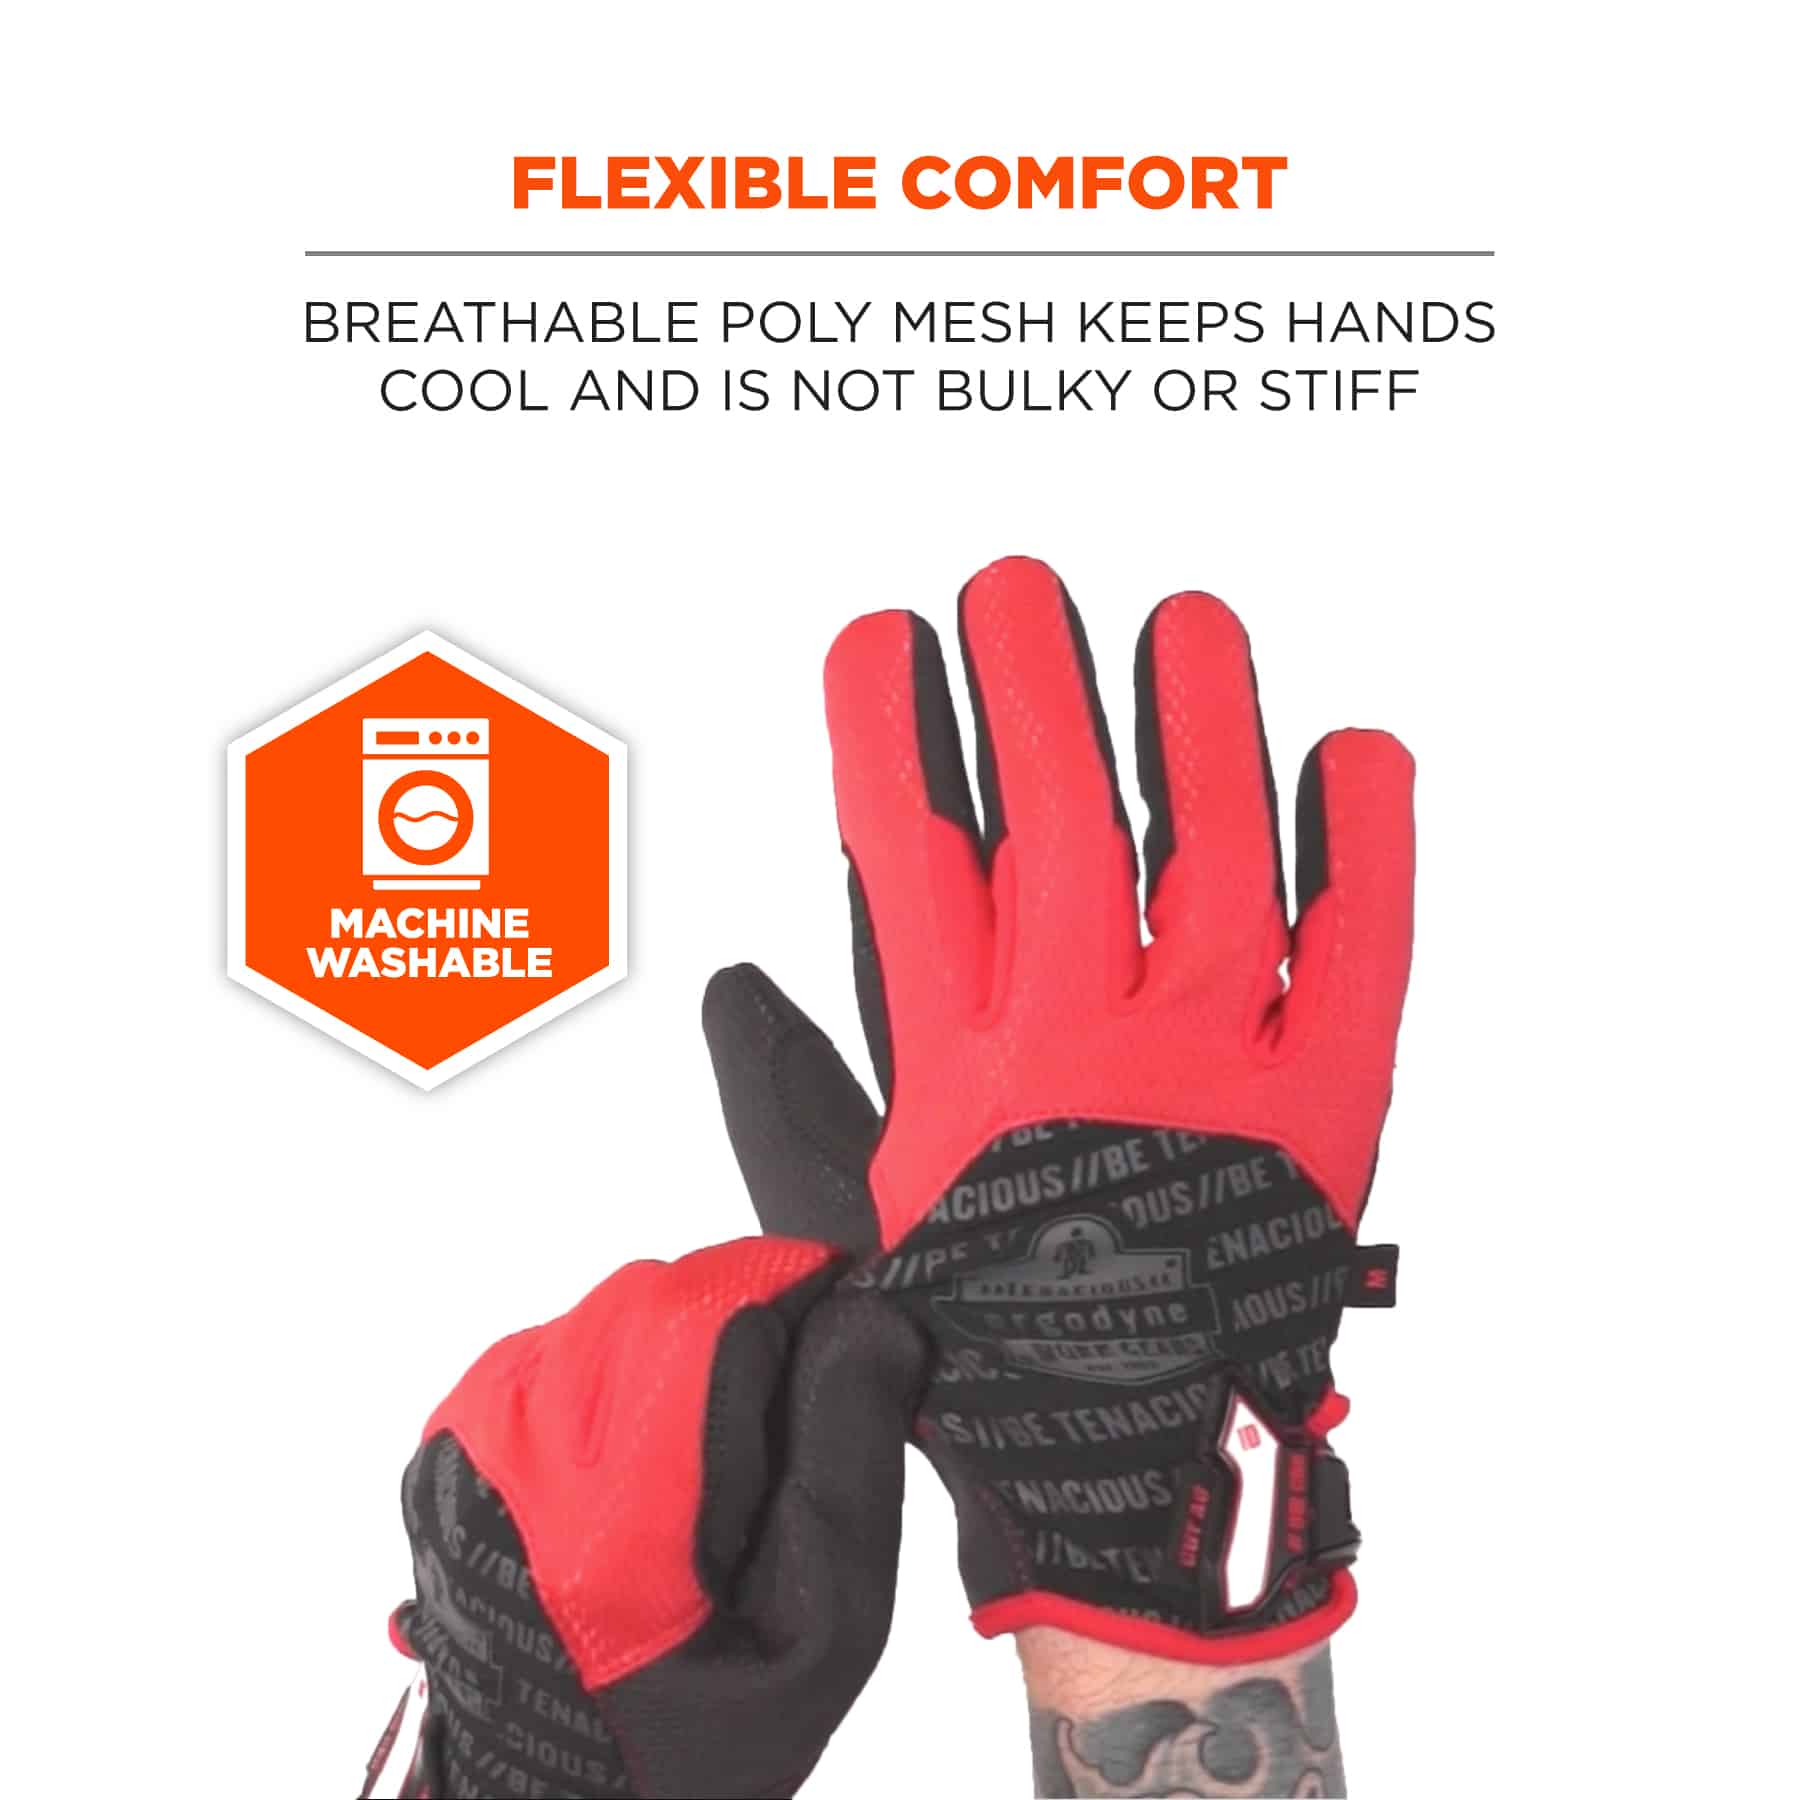 Yinrunx Cut Resistant Work Gloves Kitchen Gloves Cut Resistant Gloves  Waterproof Work Gloves Electric Working Gloves Cut Proof Glove Protection  Cut-resistant for Home Improvement Automotive Painting 